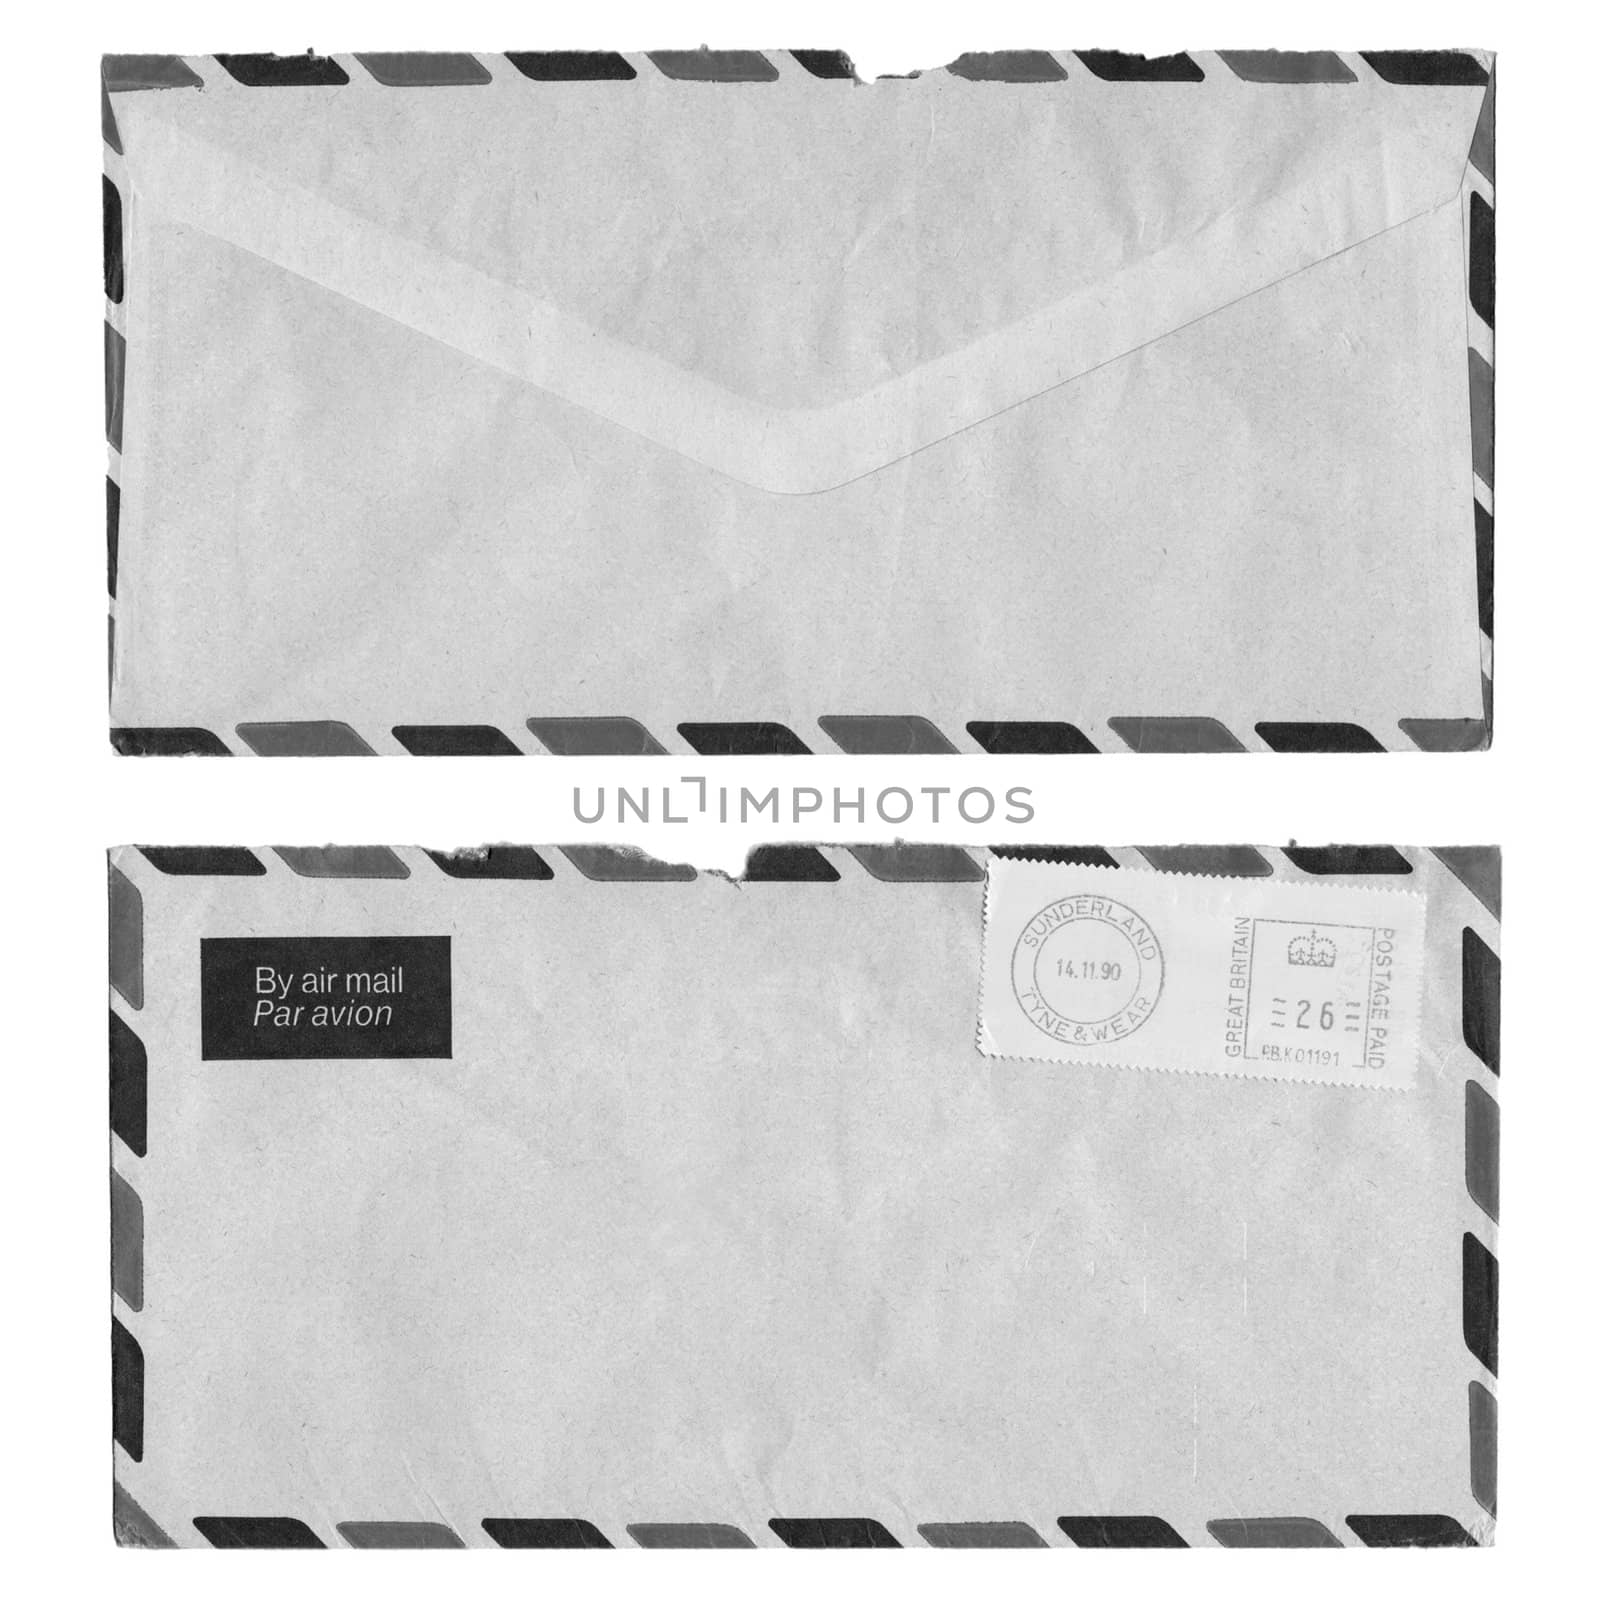 Airmail letter with UK postage meter stamp